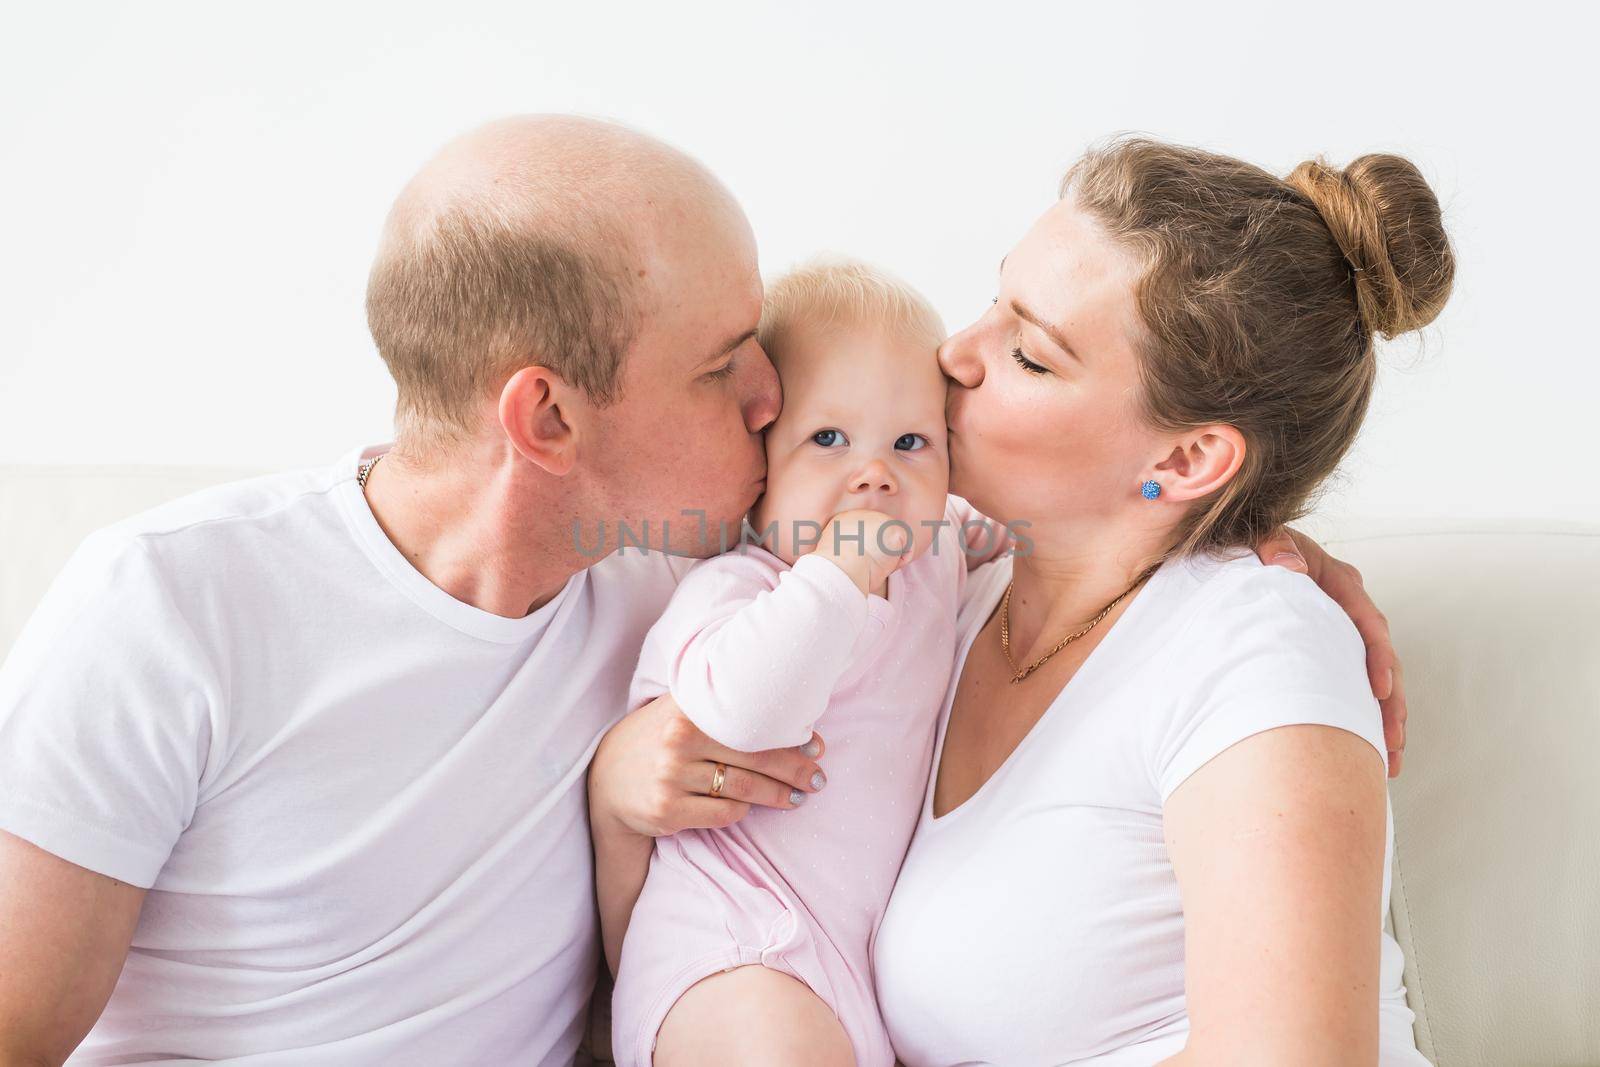 Happy family concept. Parents kissing baby smiling. by Satura86